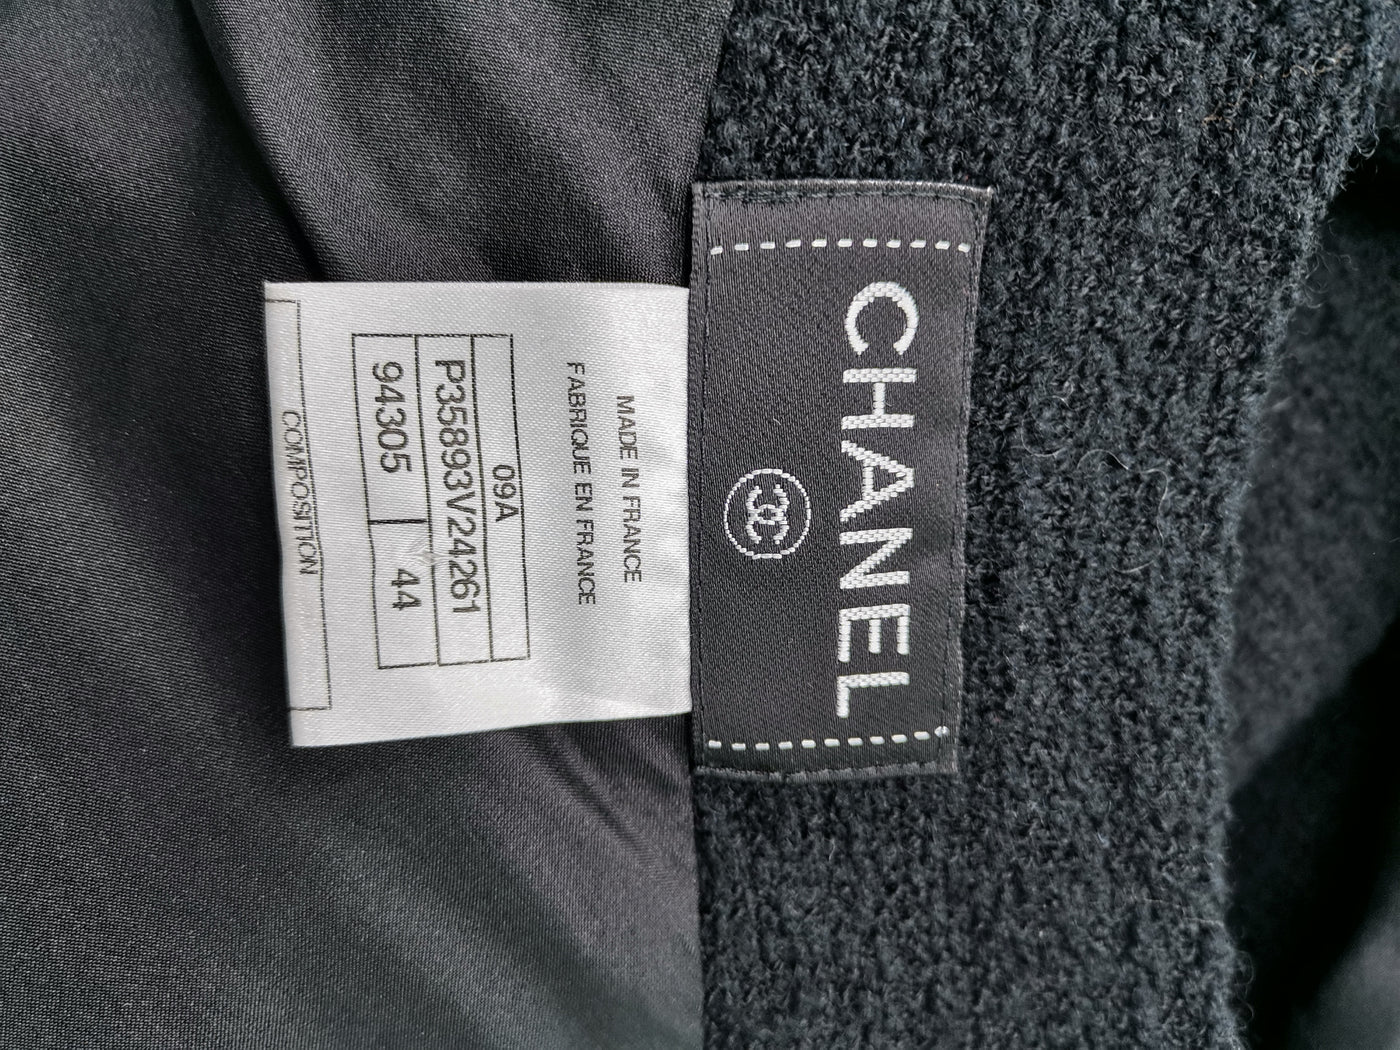 CHANEL Paris-Moscow A09 black wool jacket and skirt size 44